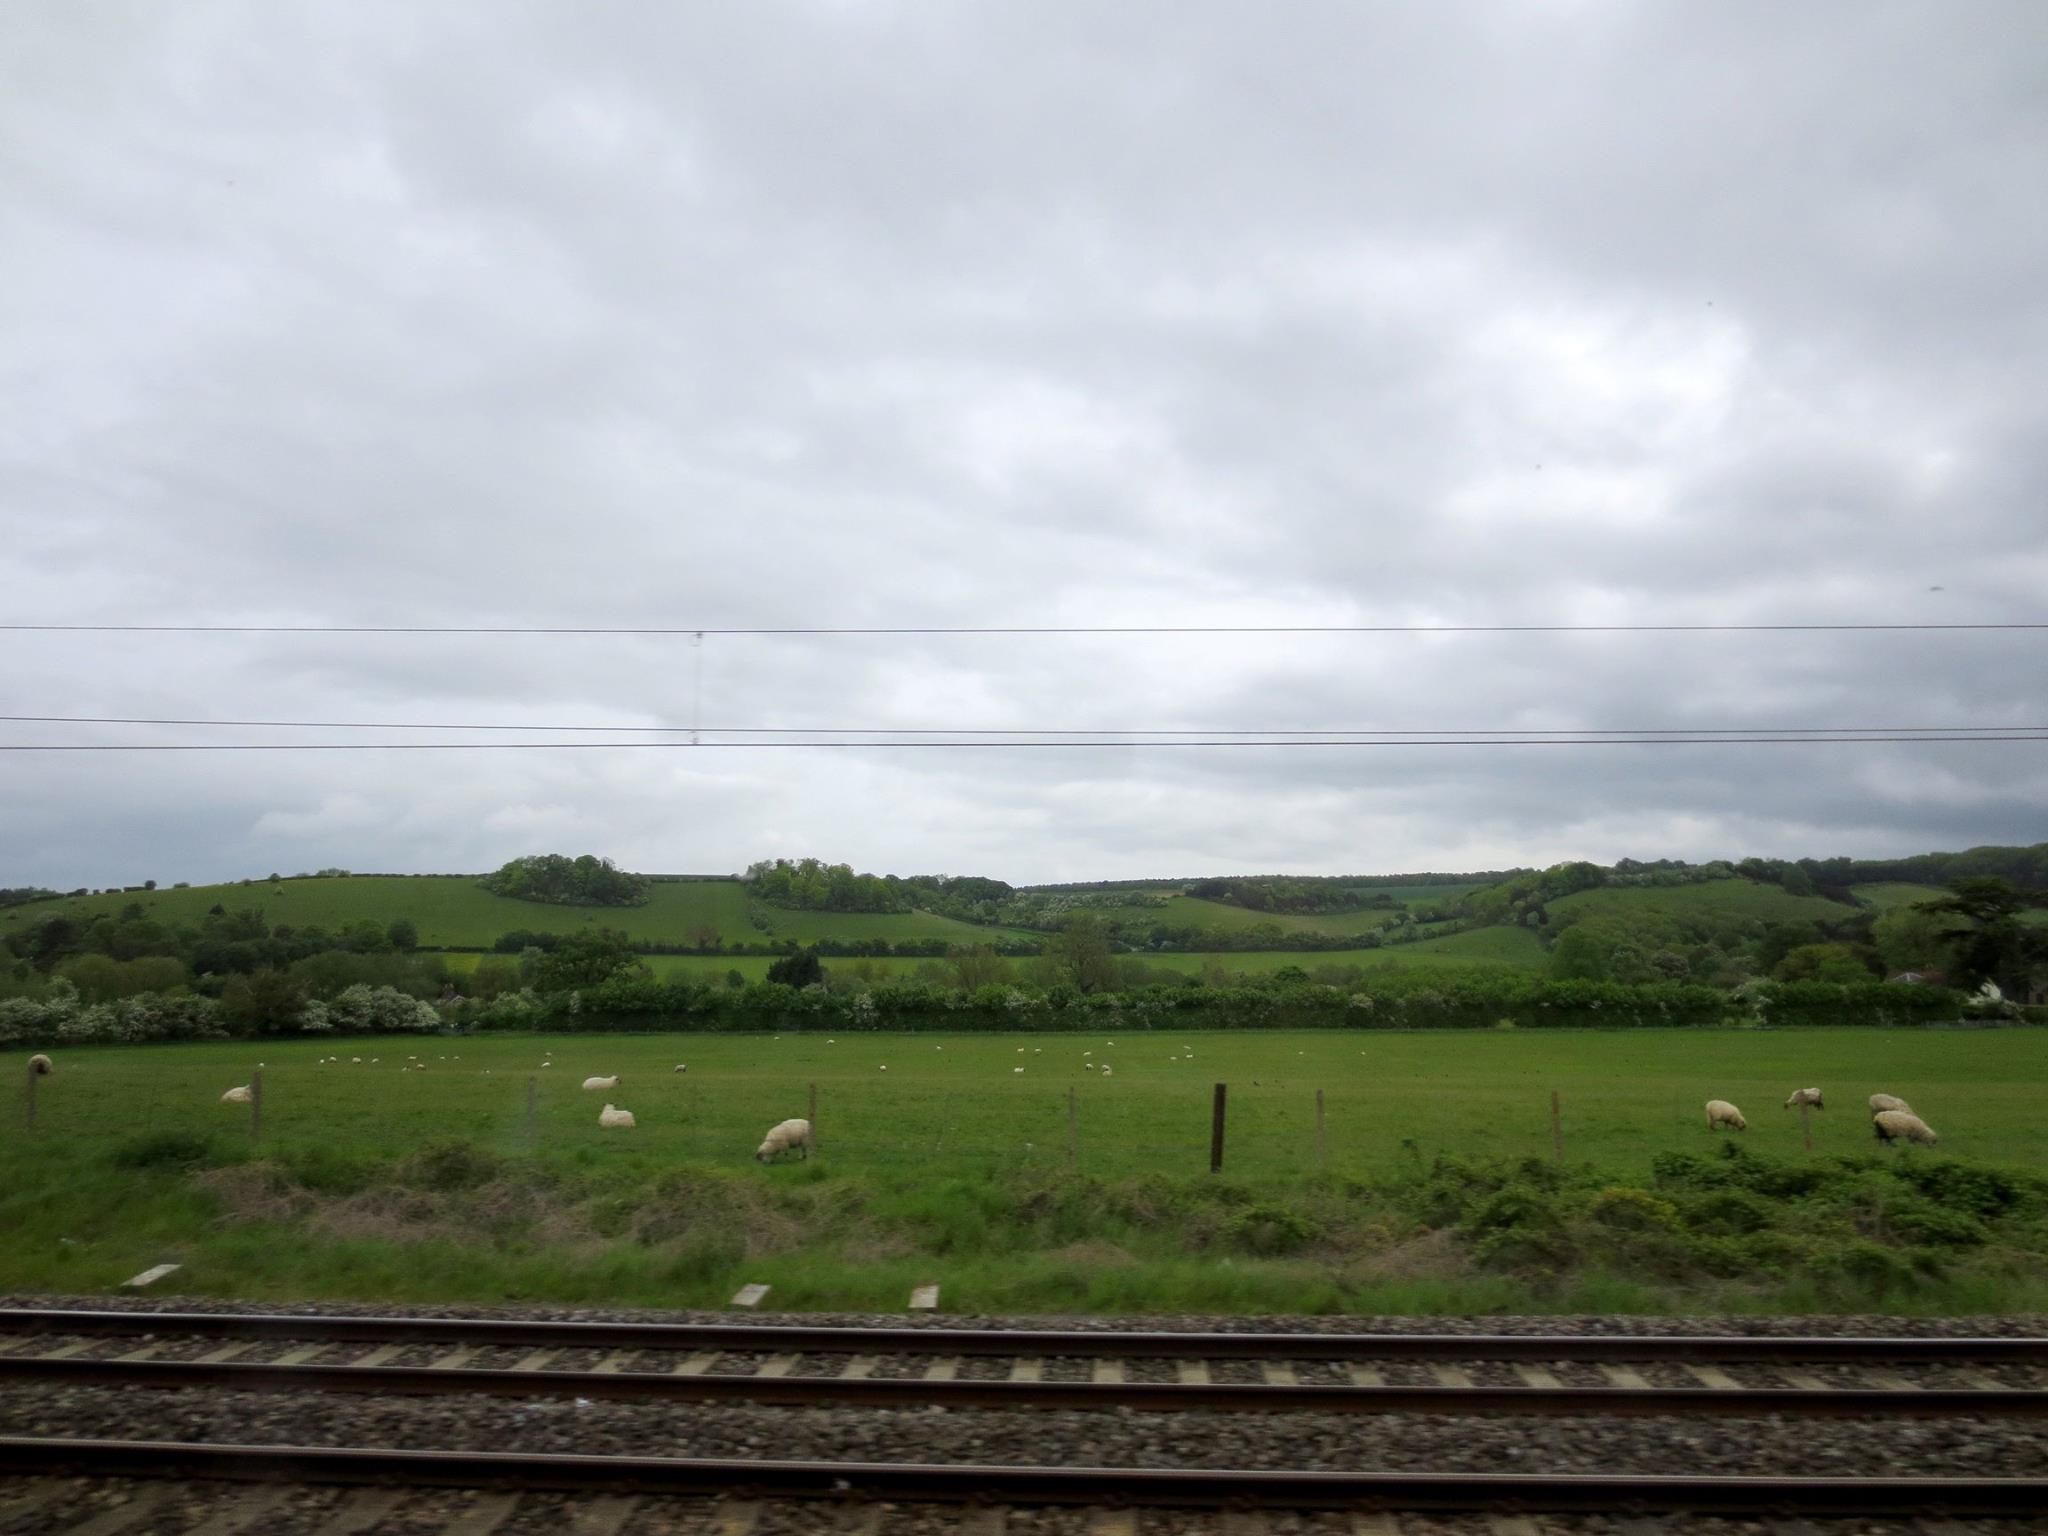 Sheep from the Train